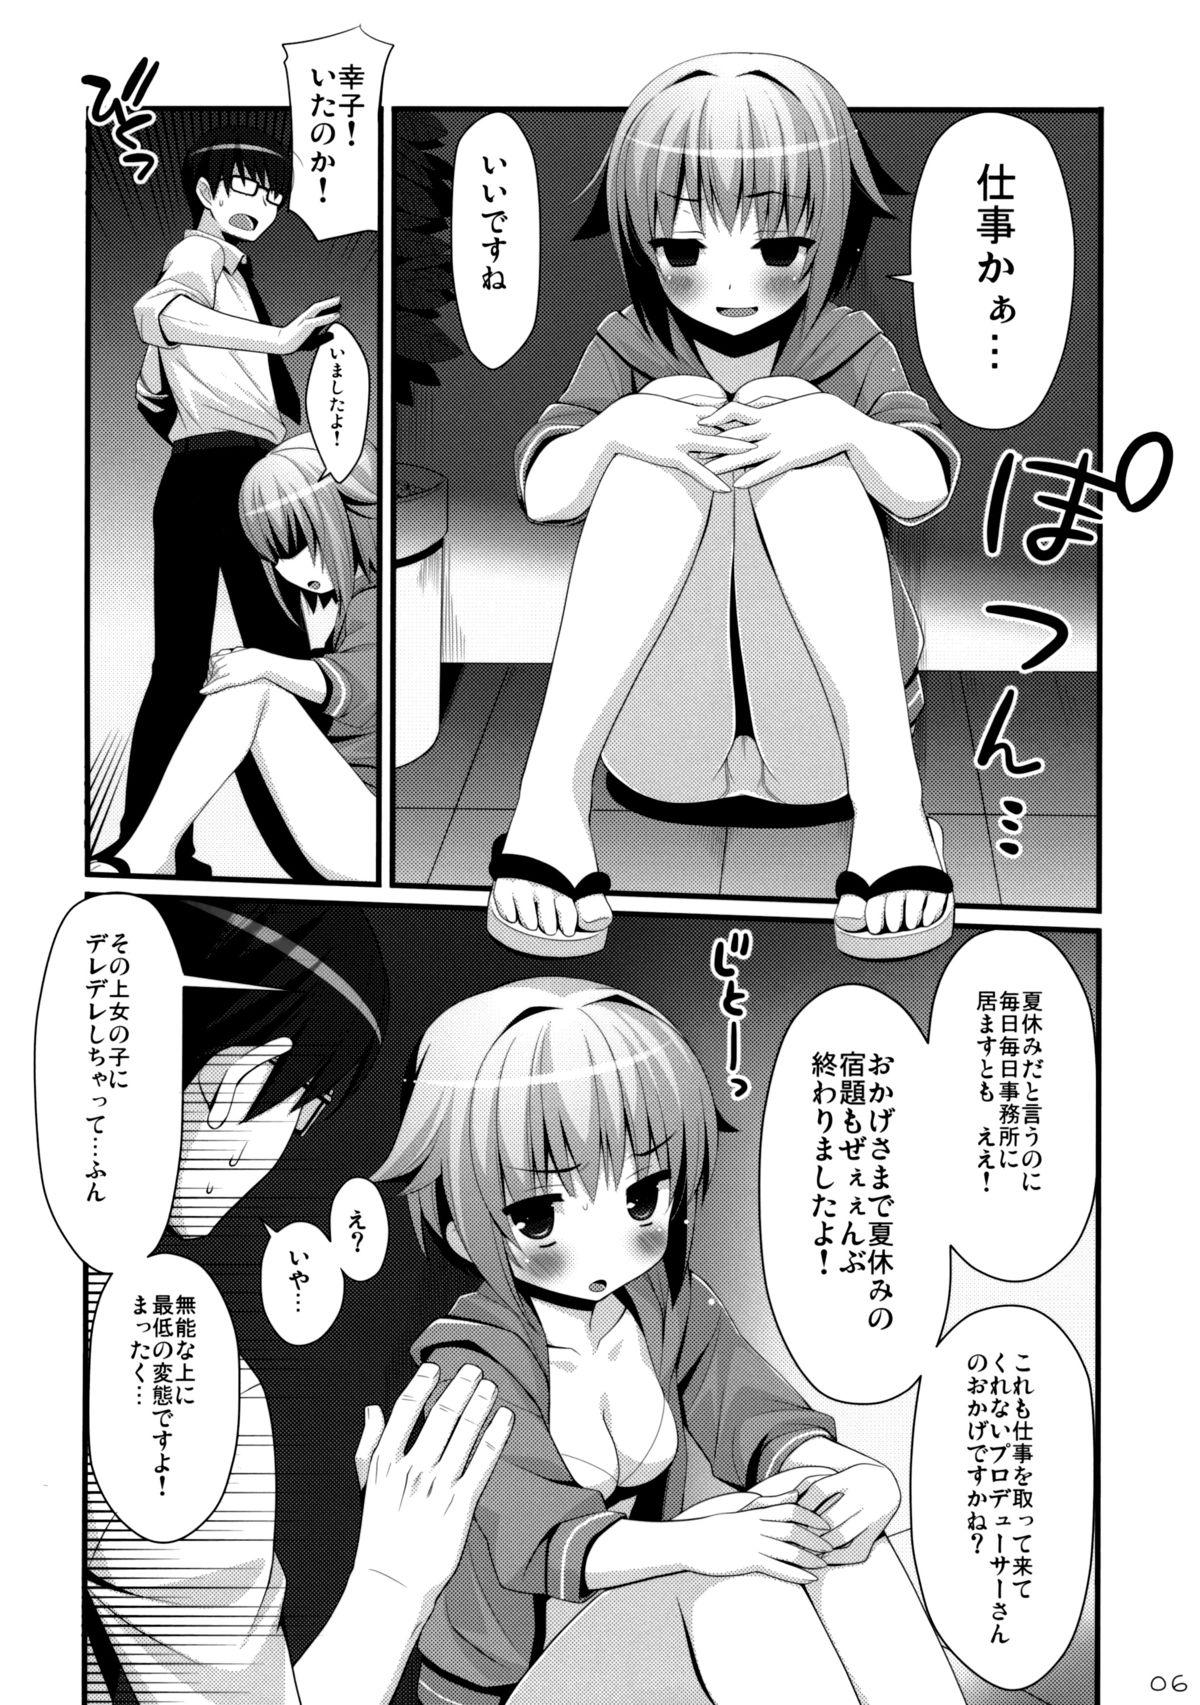 Brunet SACHIKO'S Summer vacation!! - The idolmaster Housewife - Page 6